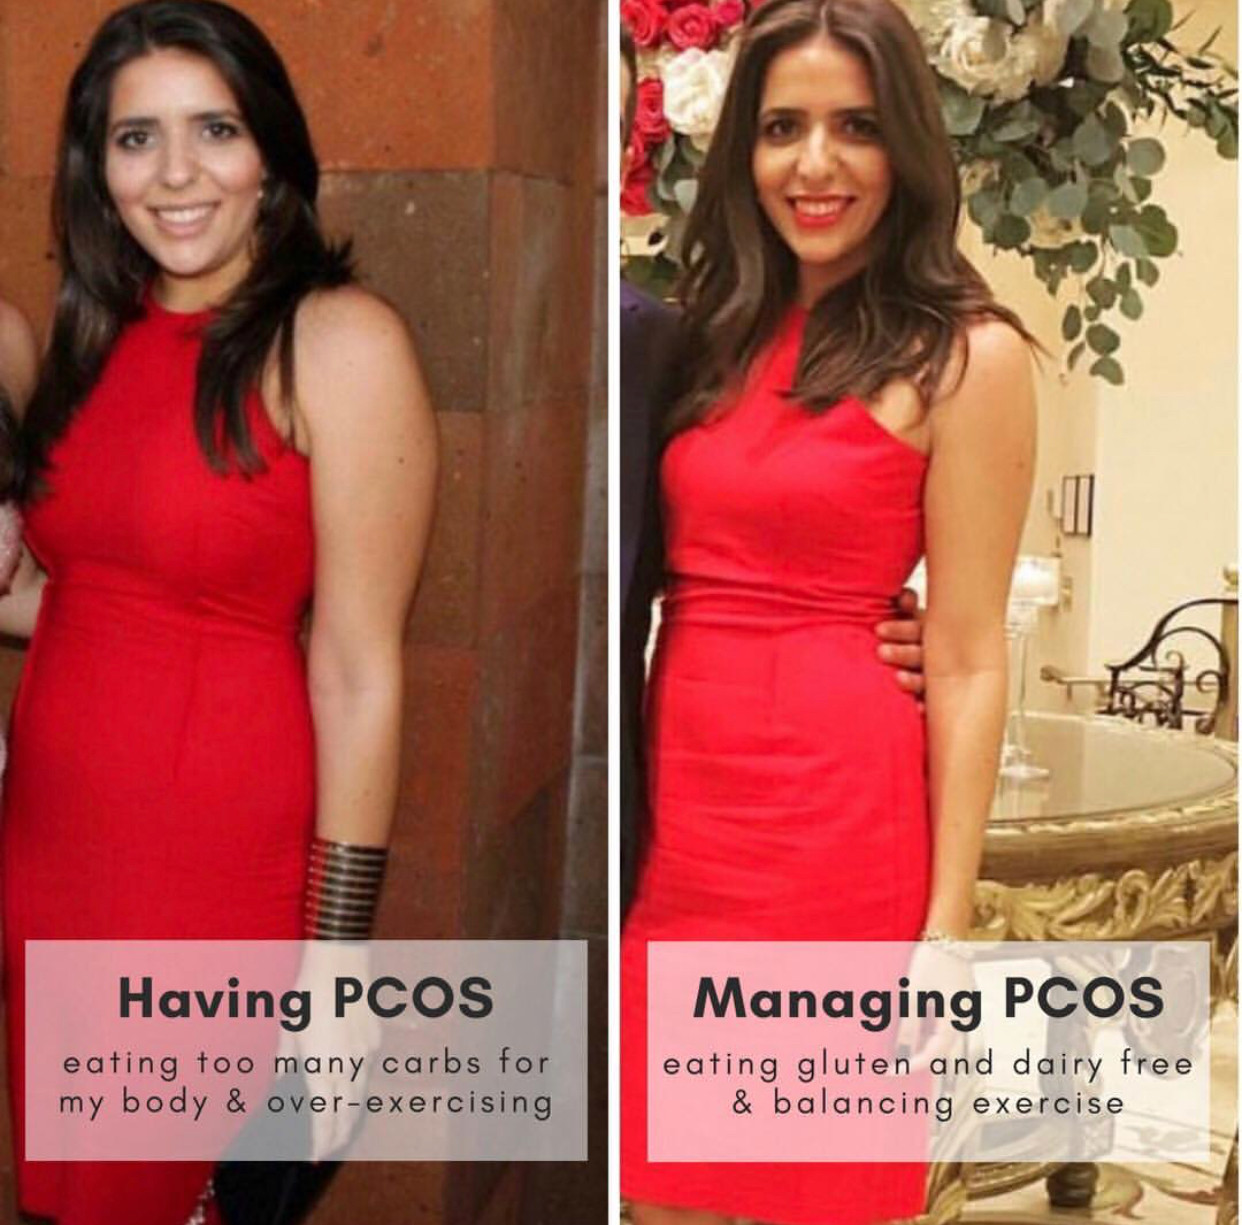 How To Lose Weight With Pcos
 3 Steps to PCOS Weight Loss via Gluten & Dairy Free